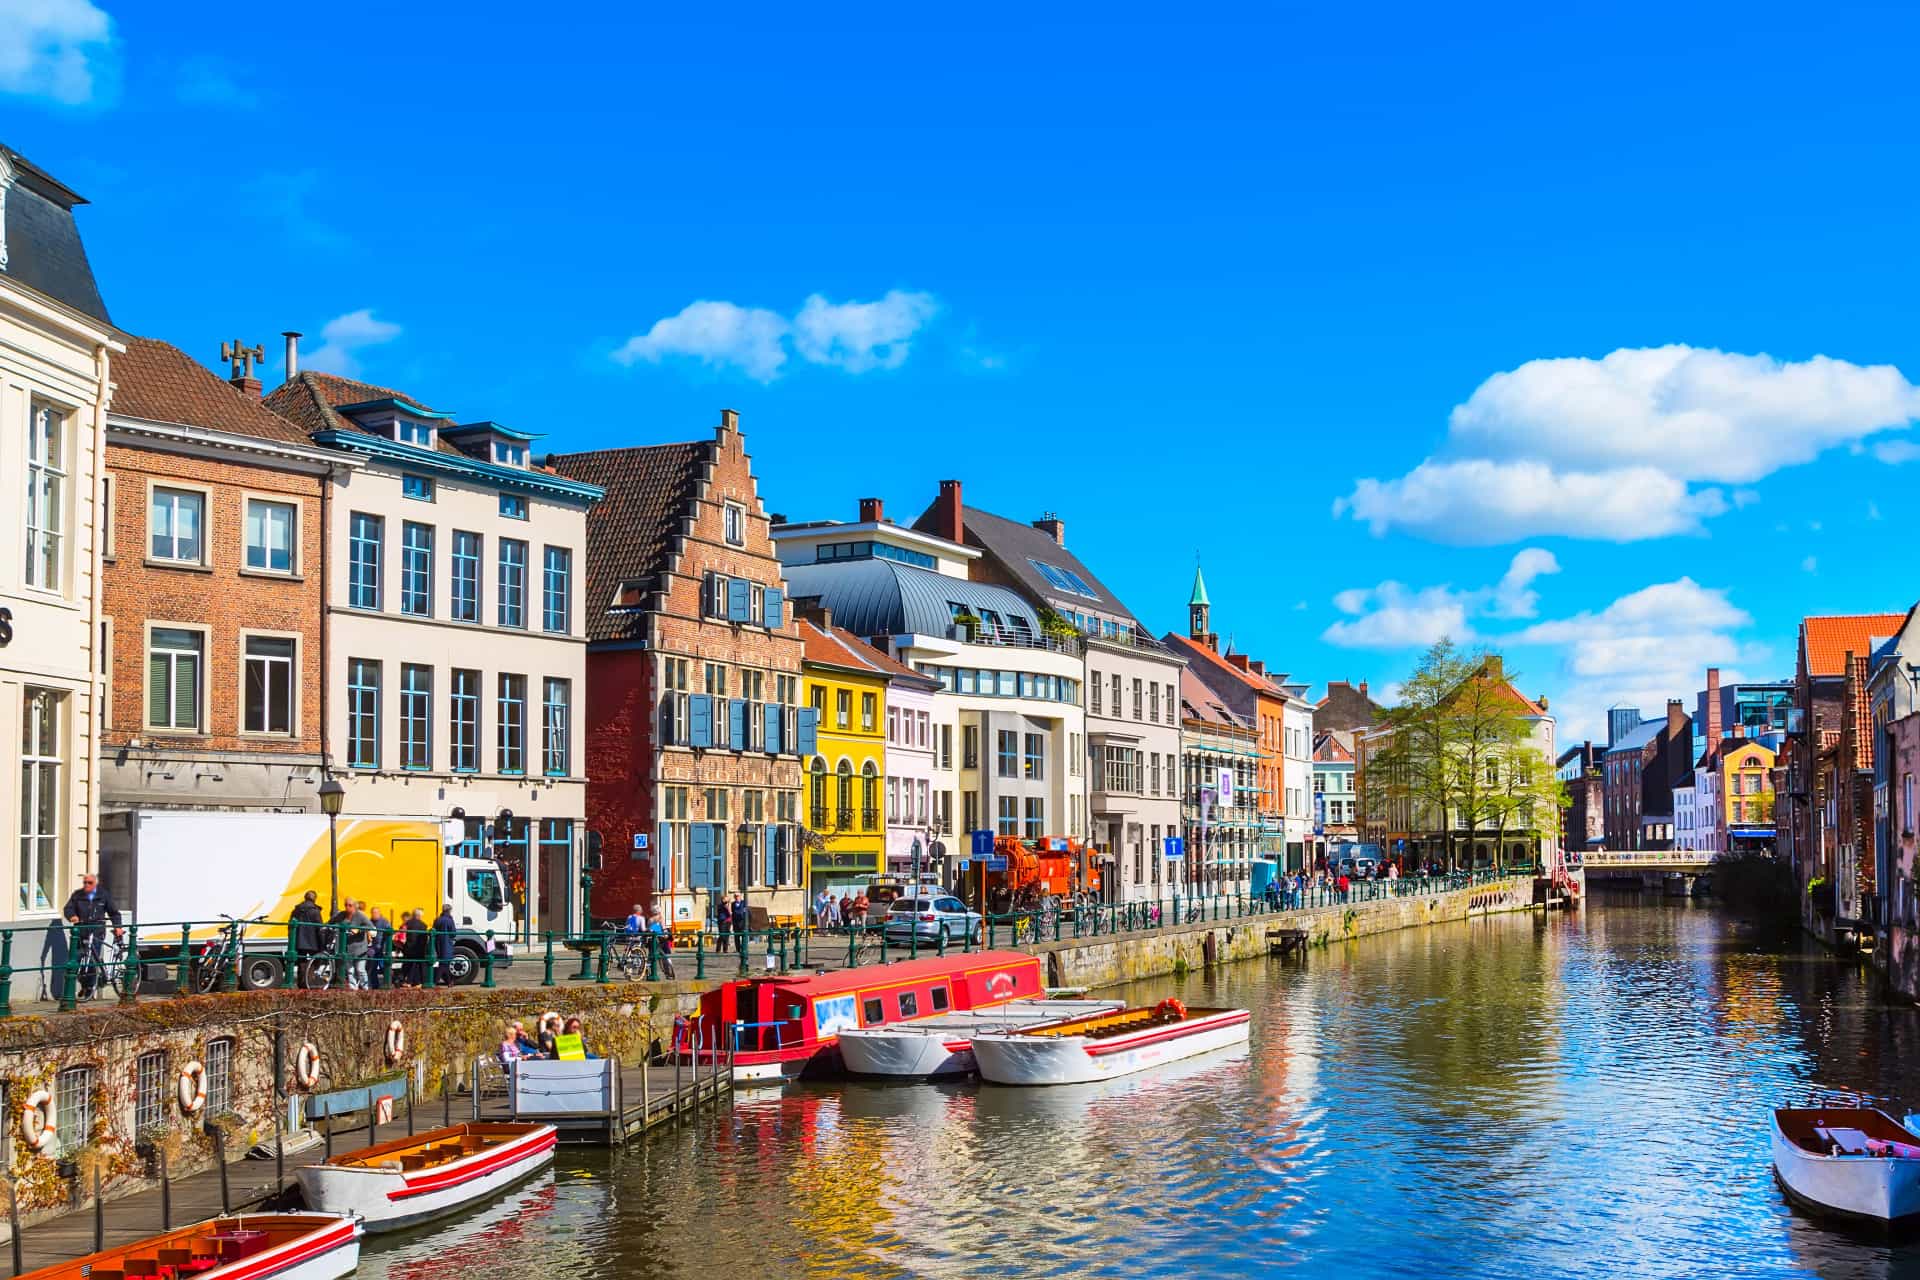 Ghent is the largest city in East Flanders after Antwerp, and was one of the most important cities in Europe in the Middle Ages between the 11th and 16th centuries. Today, it's full of history, medieval structures, and great food!